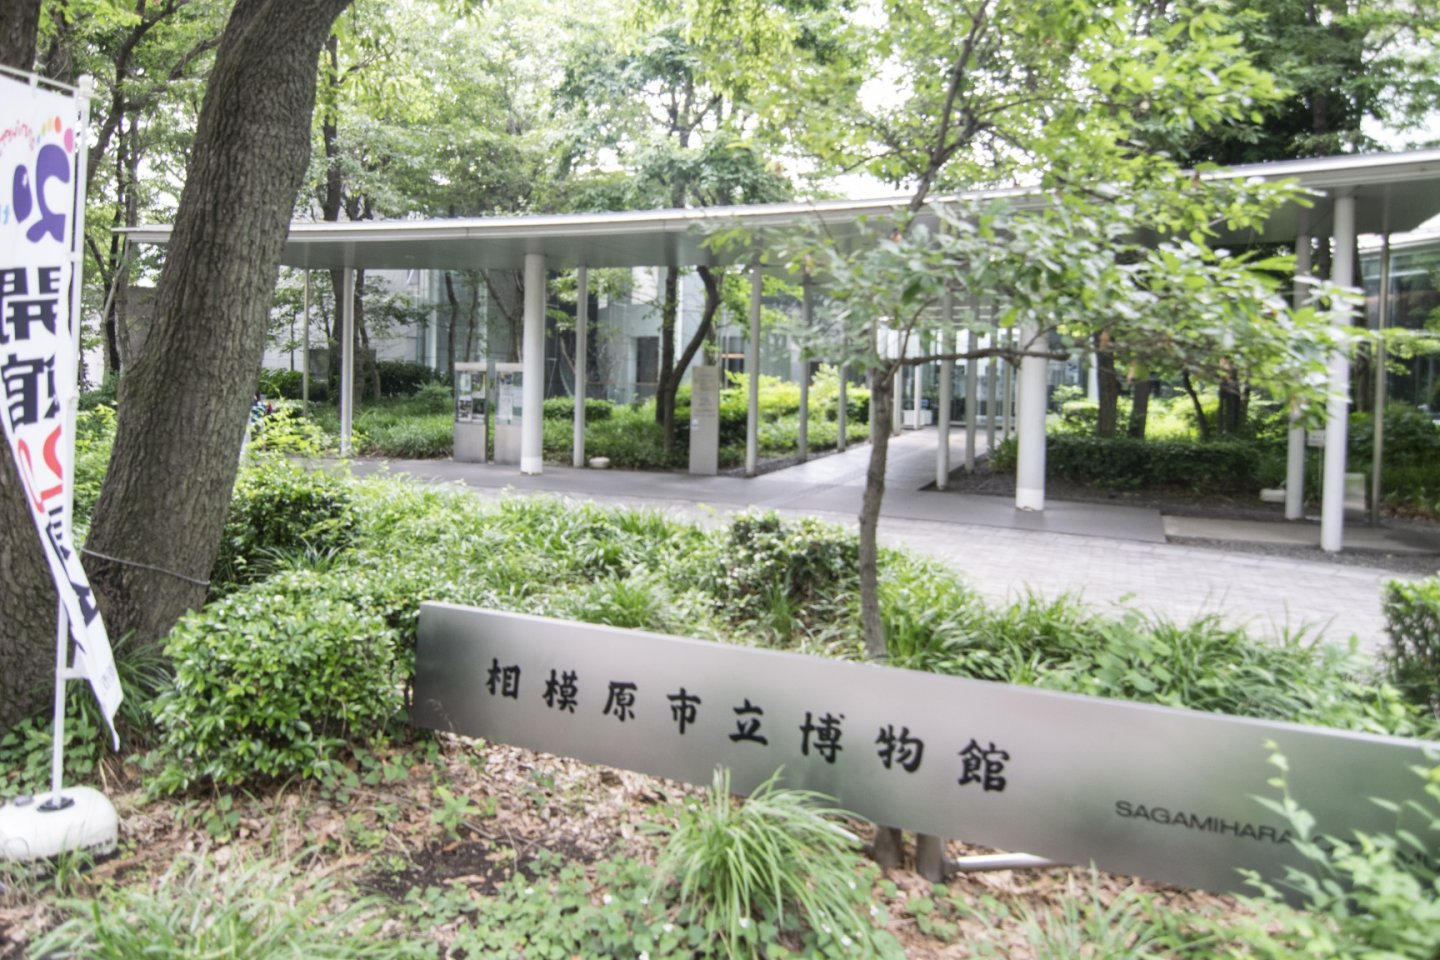 The entrance to Sagamihara City Museum, an driveway shrouded by lushious greens.